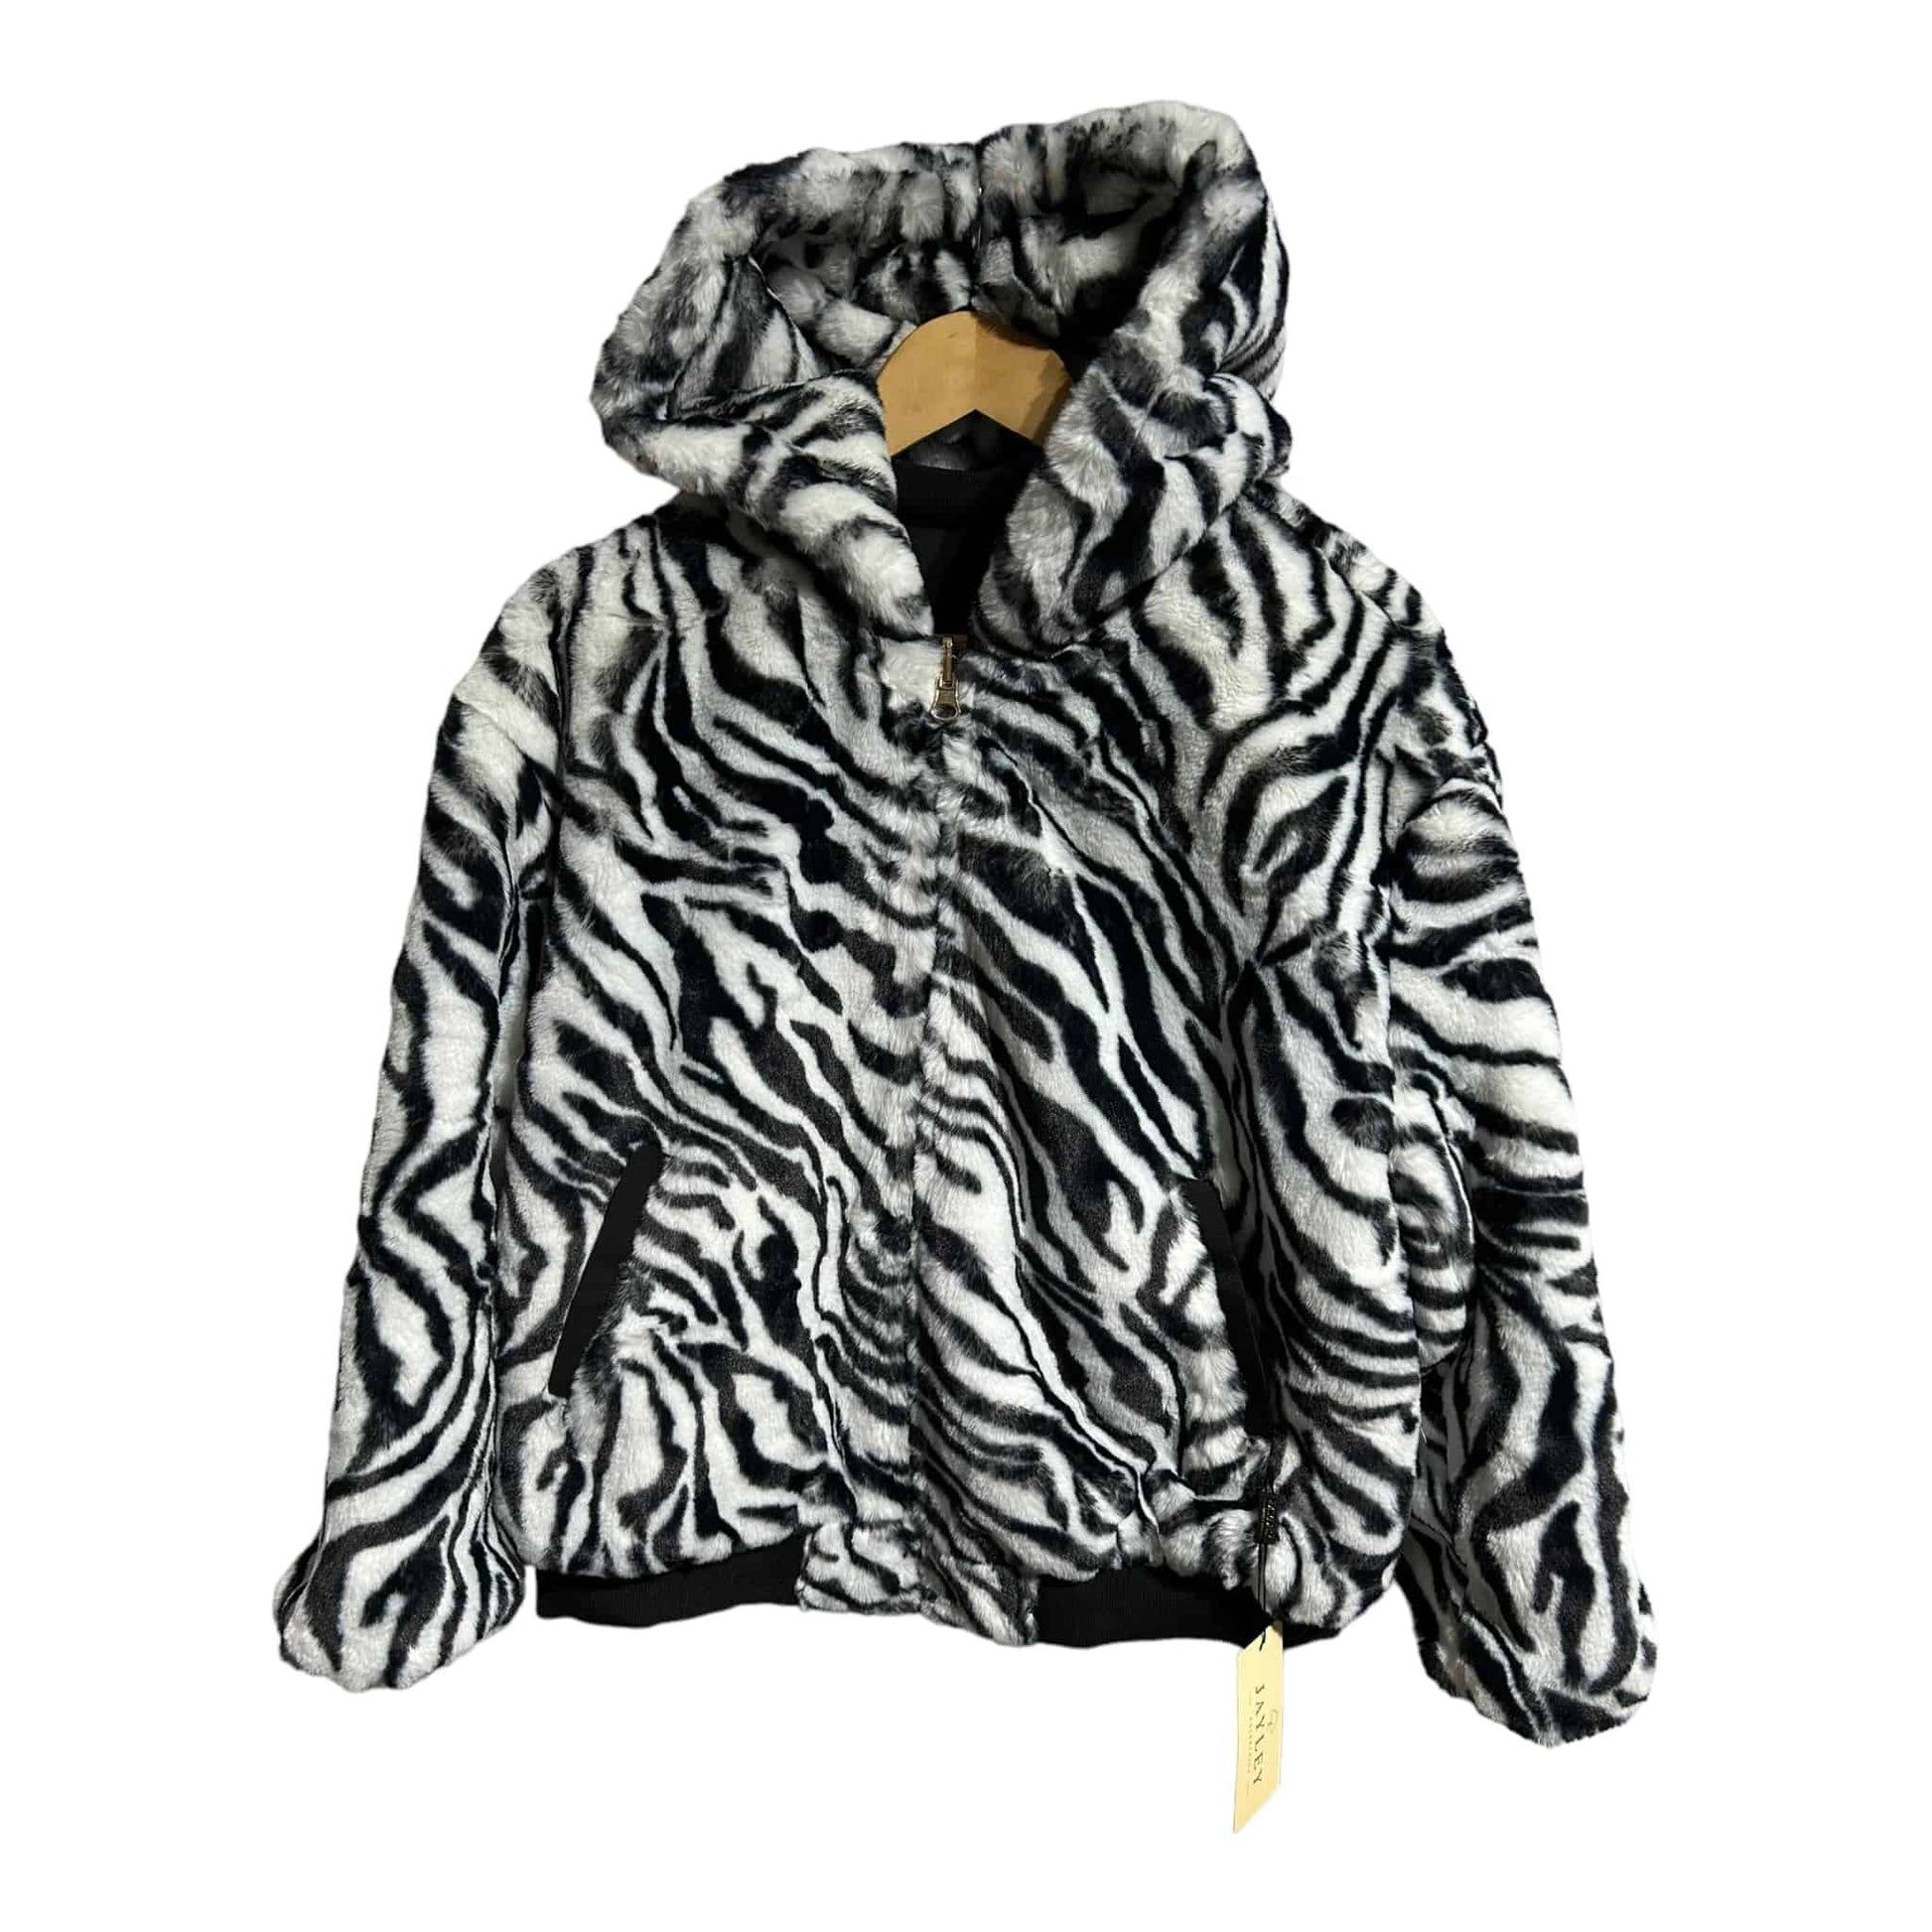 Jayley Collection Faux Fur Zebra Print Reversible Hooded Jacket - Recurring.Life